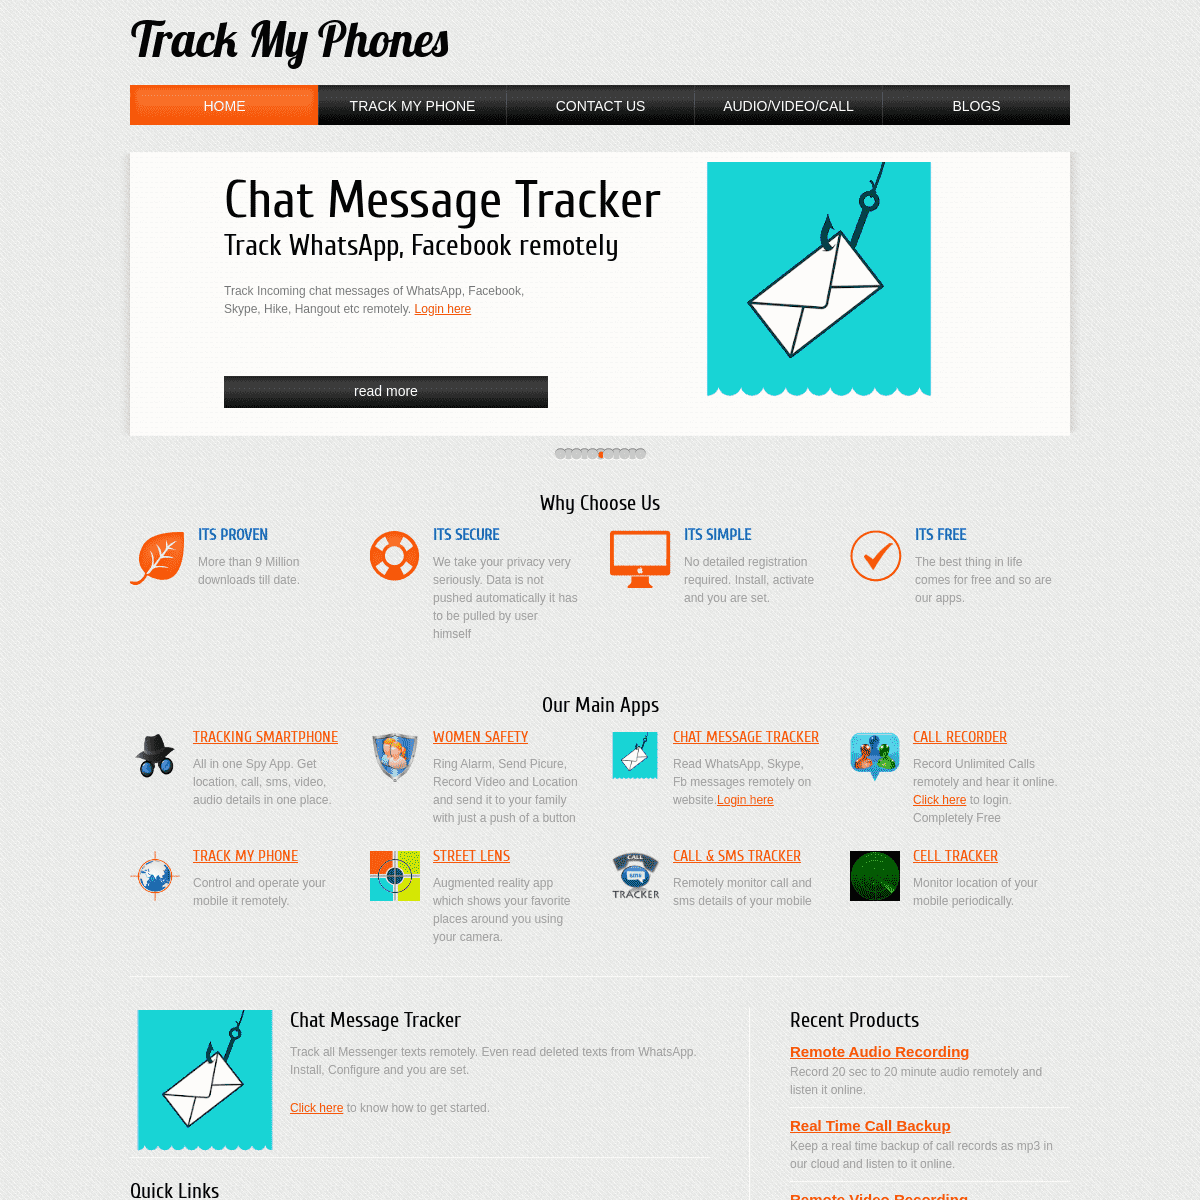 A complete backup of trackmyphones.com